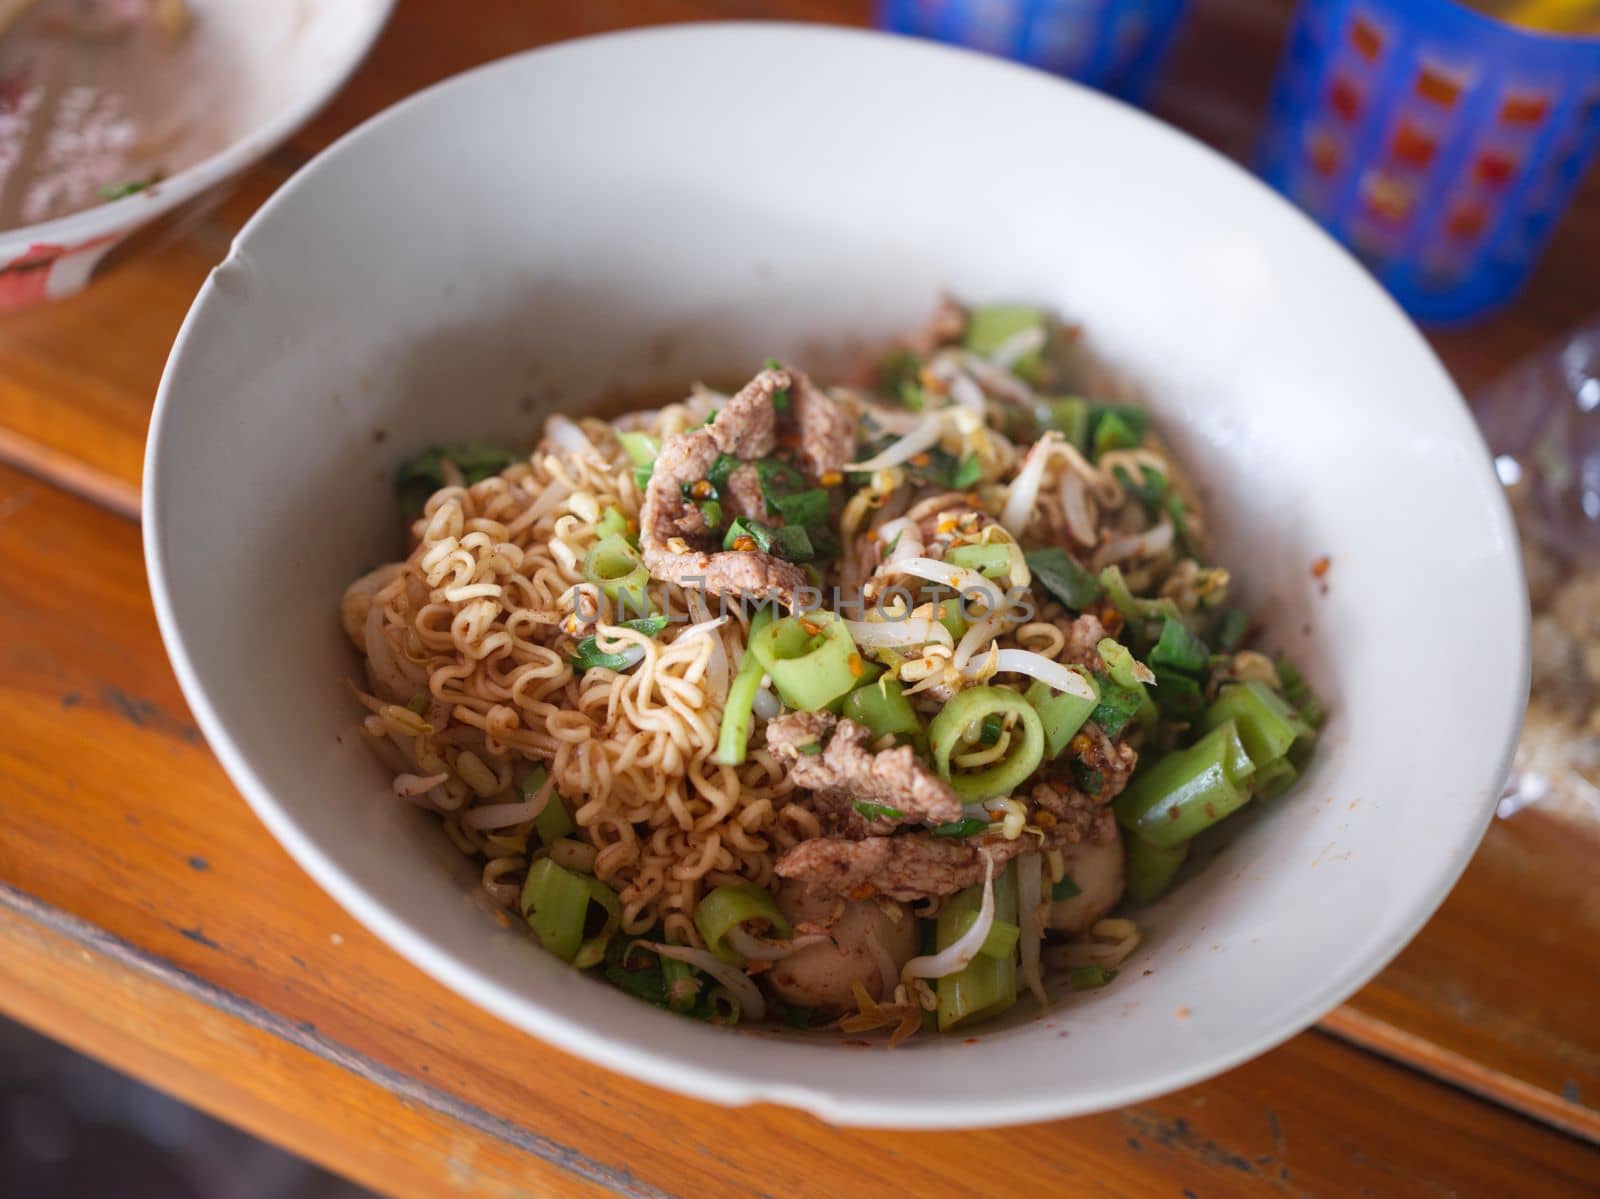 Thai Noodle beef is very delicious on wood table